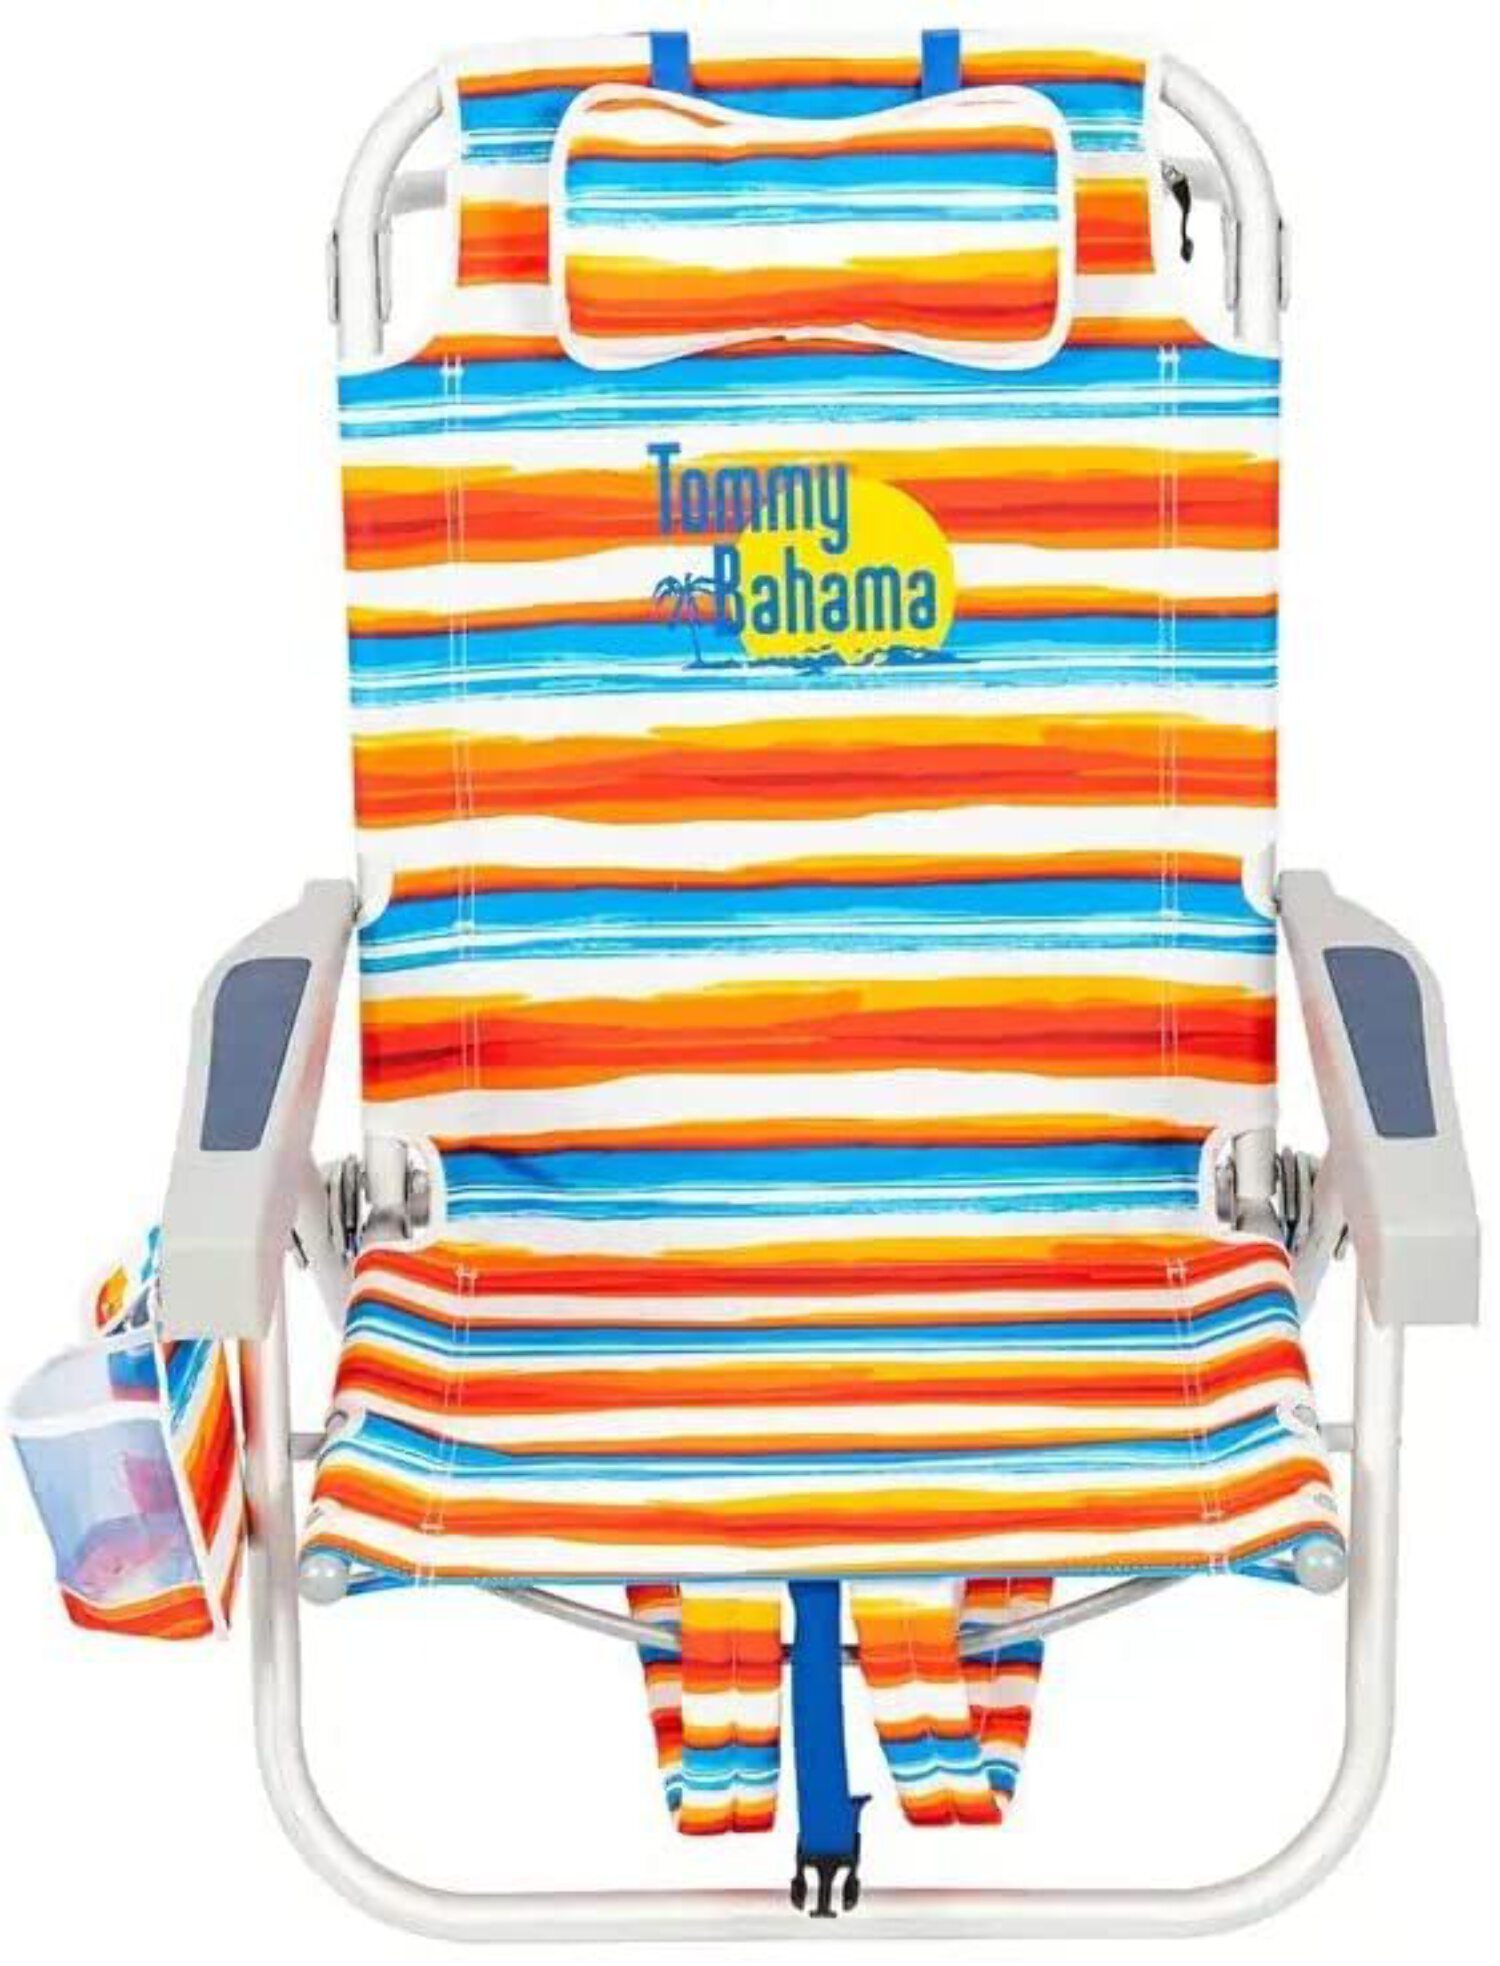 Tommy Bahama Backpack Beach Chair - image 5 of 10